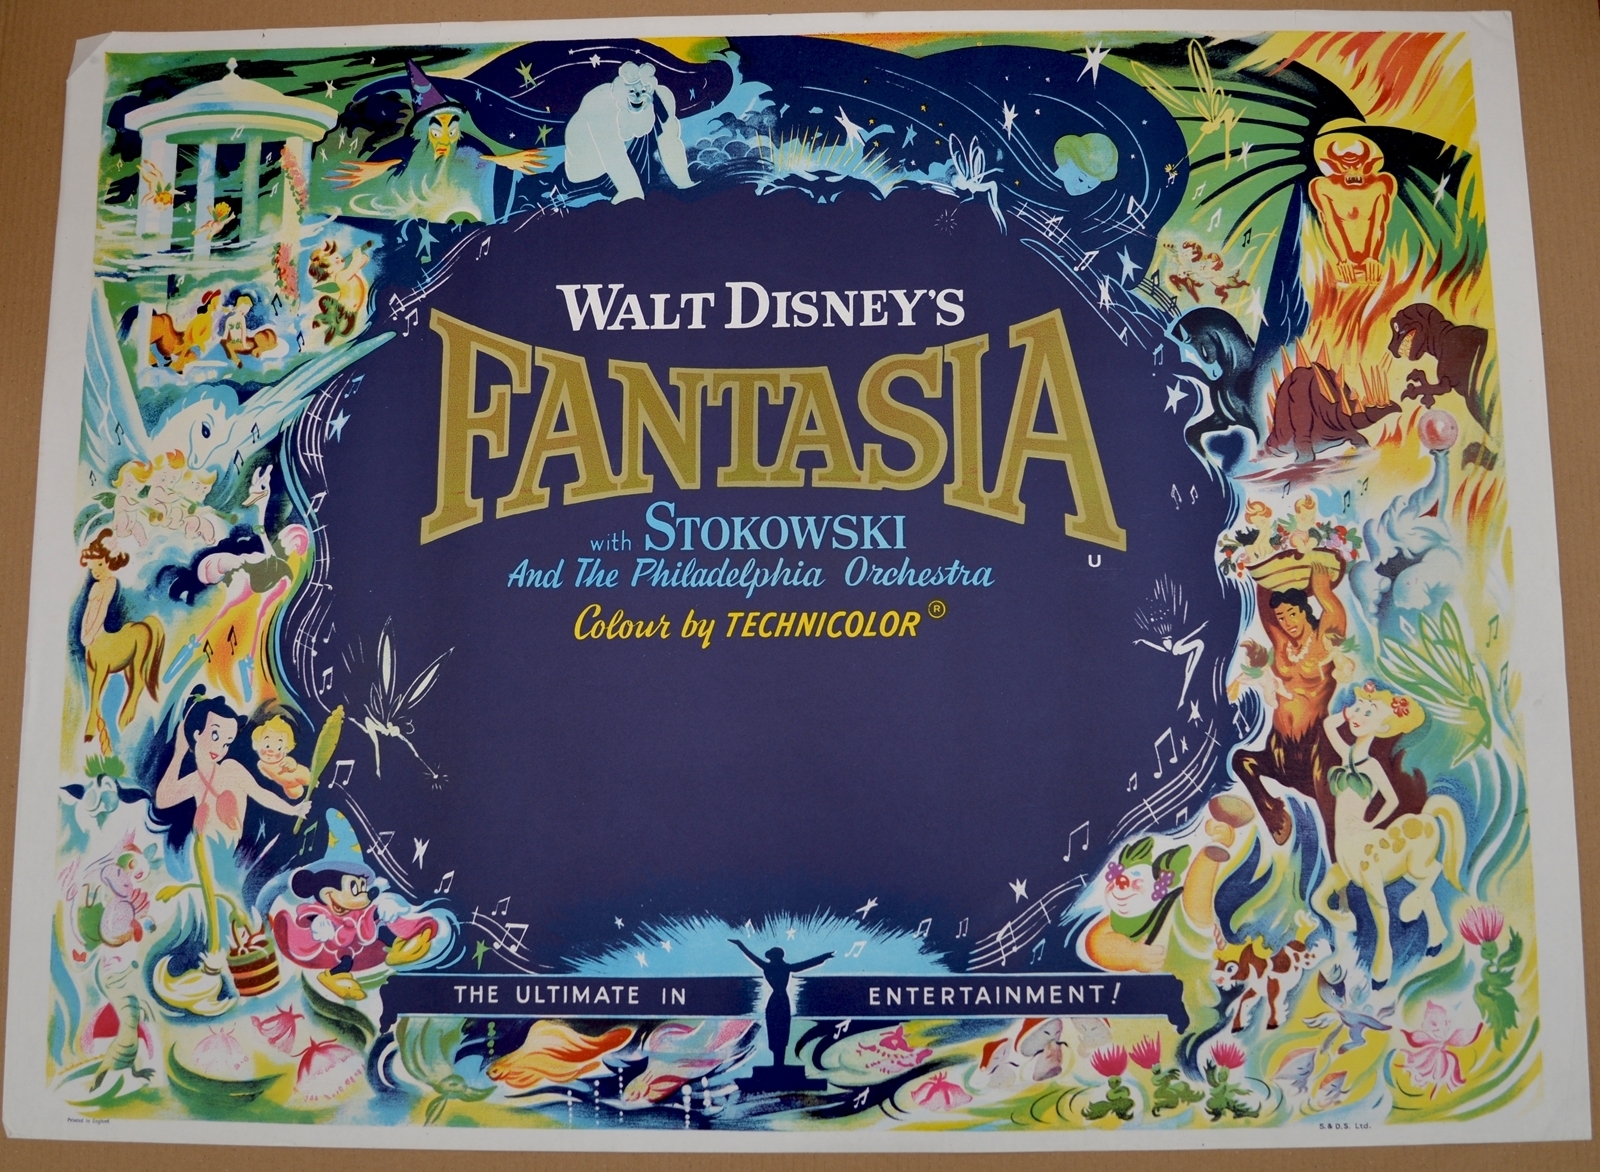 FANTASIA (1968 Release) - UK Quad Film Poster - 30" x 40" (76 x 101.5 cm) - Folded (as issued) -